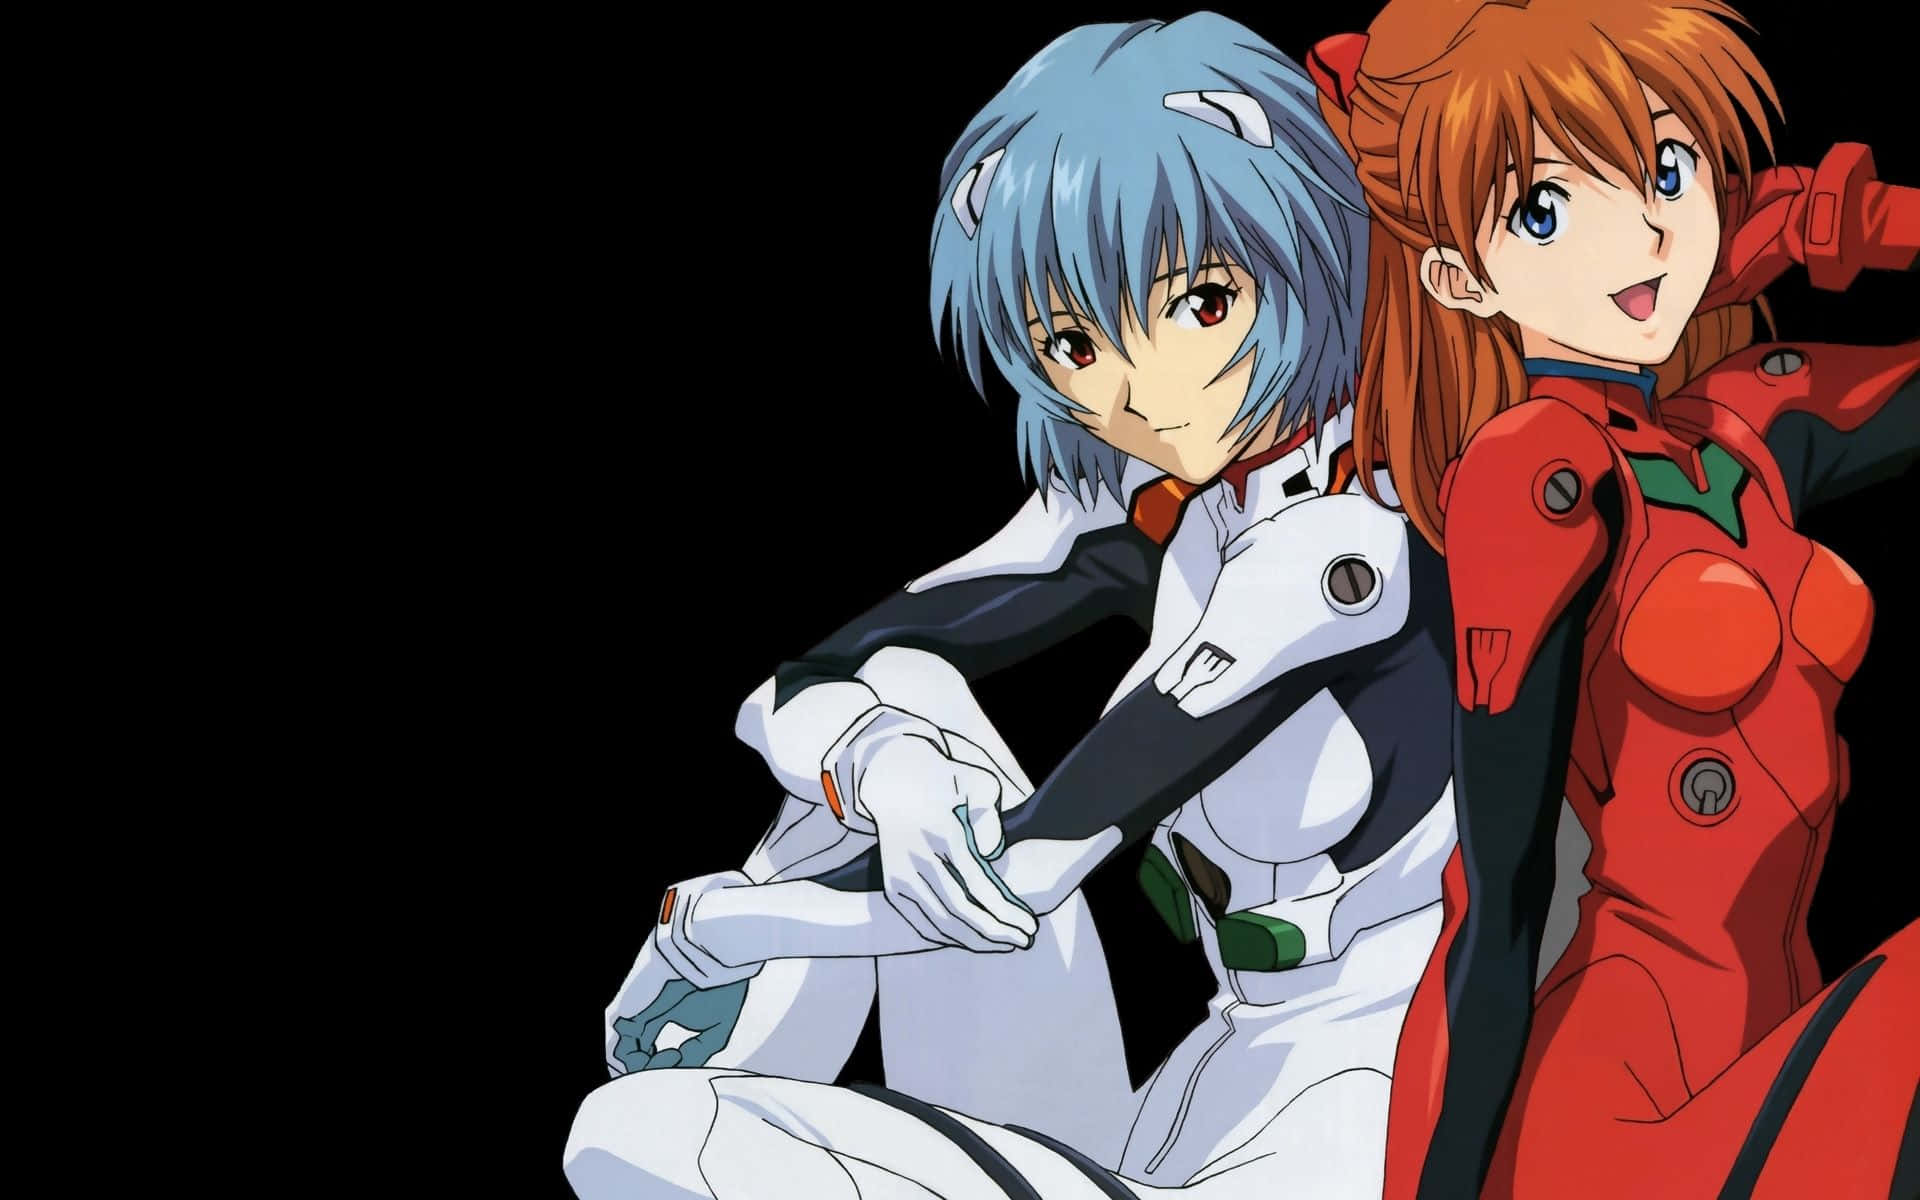 Intriguing Rei Ayanami In A Mysterious Scene Background